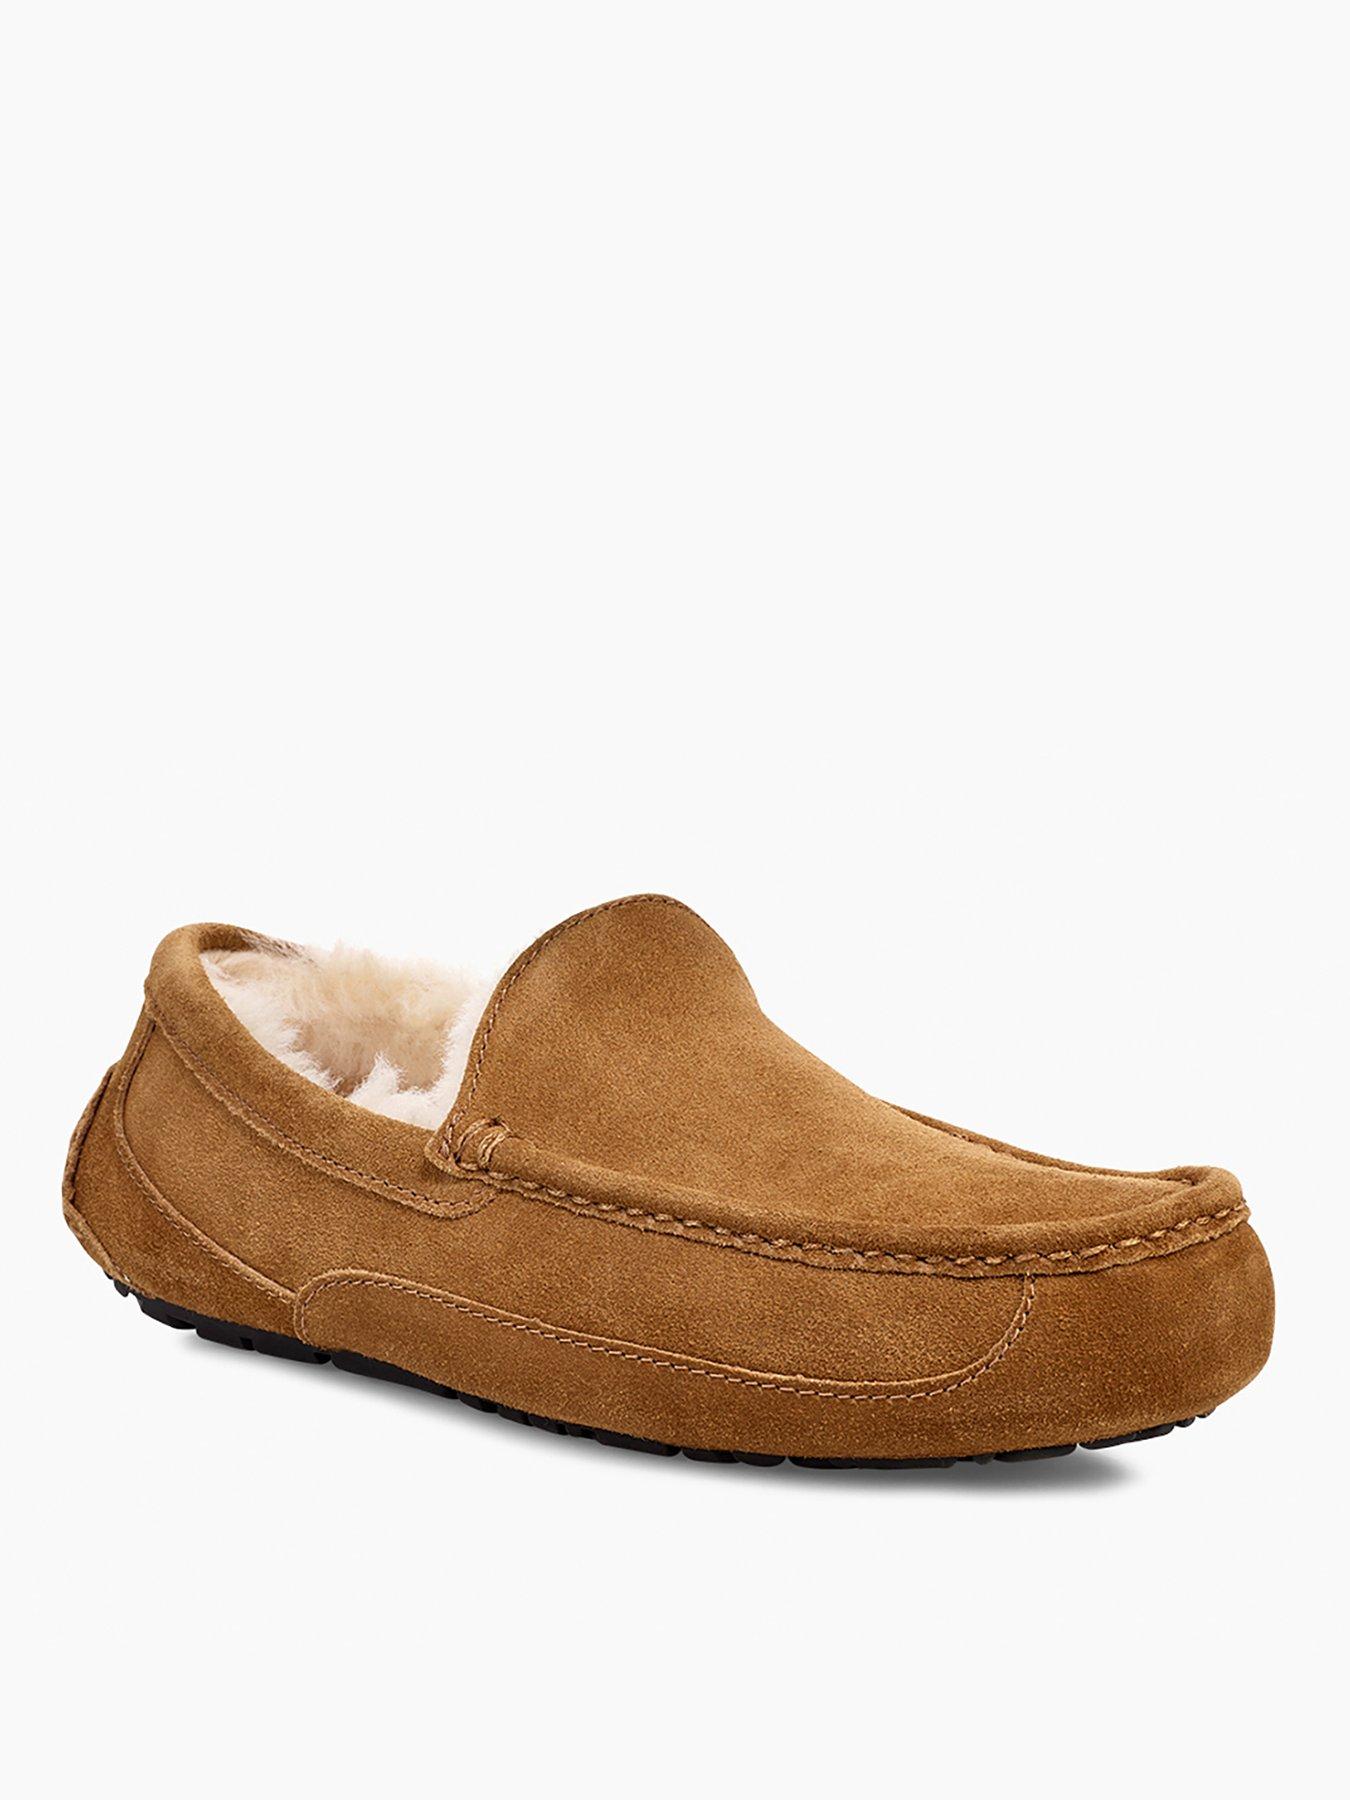  Ugg Ascot Wool Lined Slippers